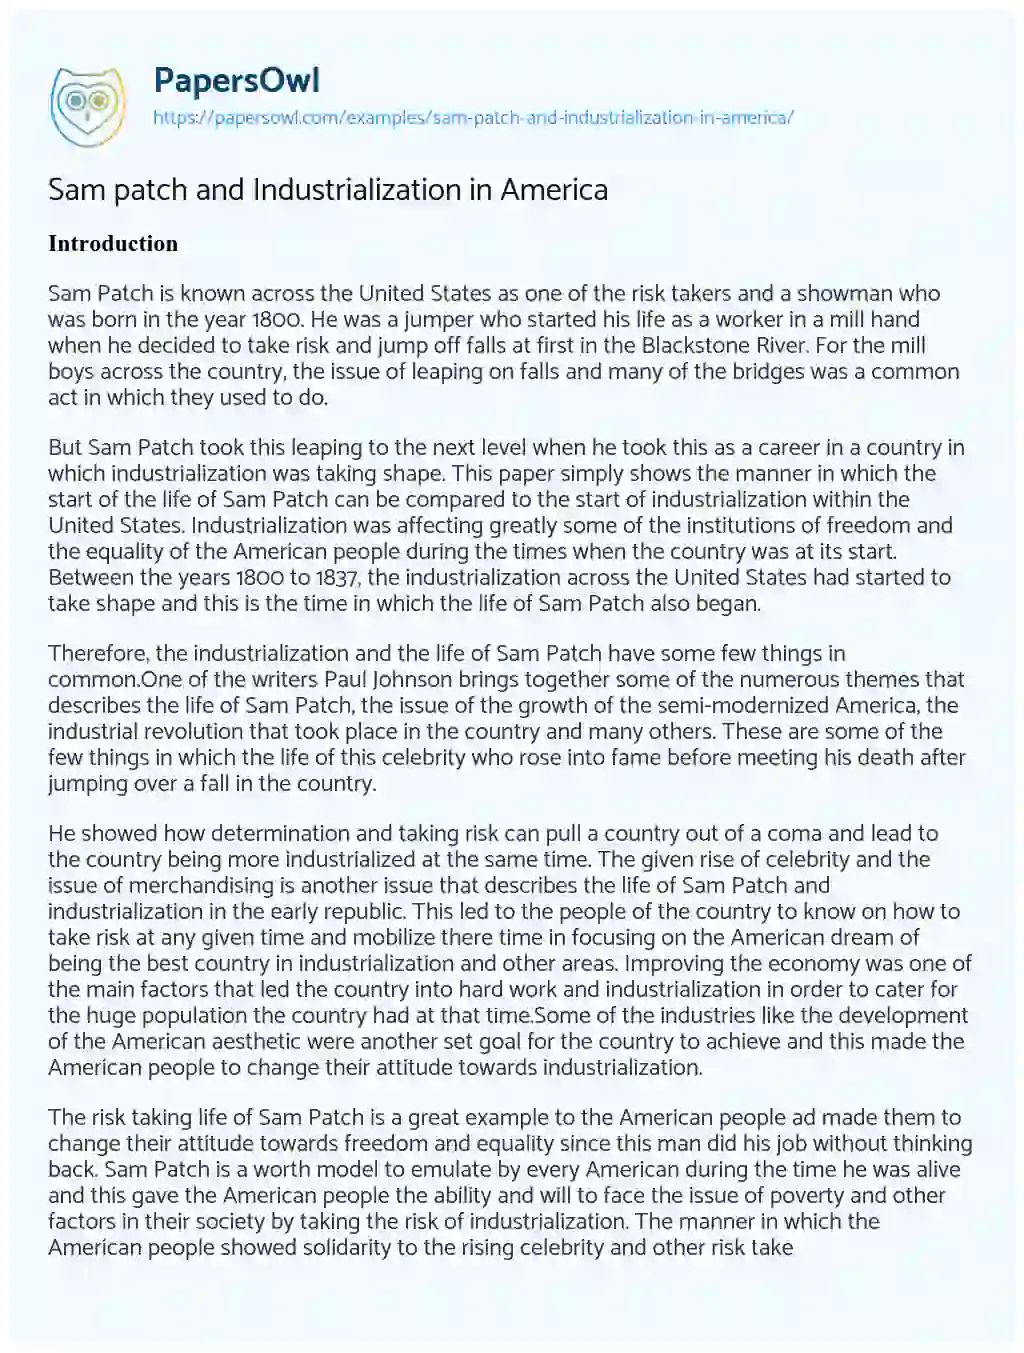 Essay on Sam Patch and Industrialization in America